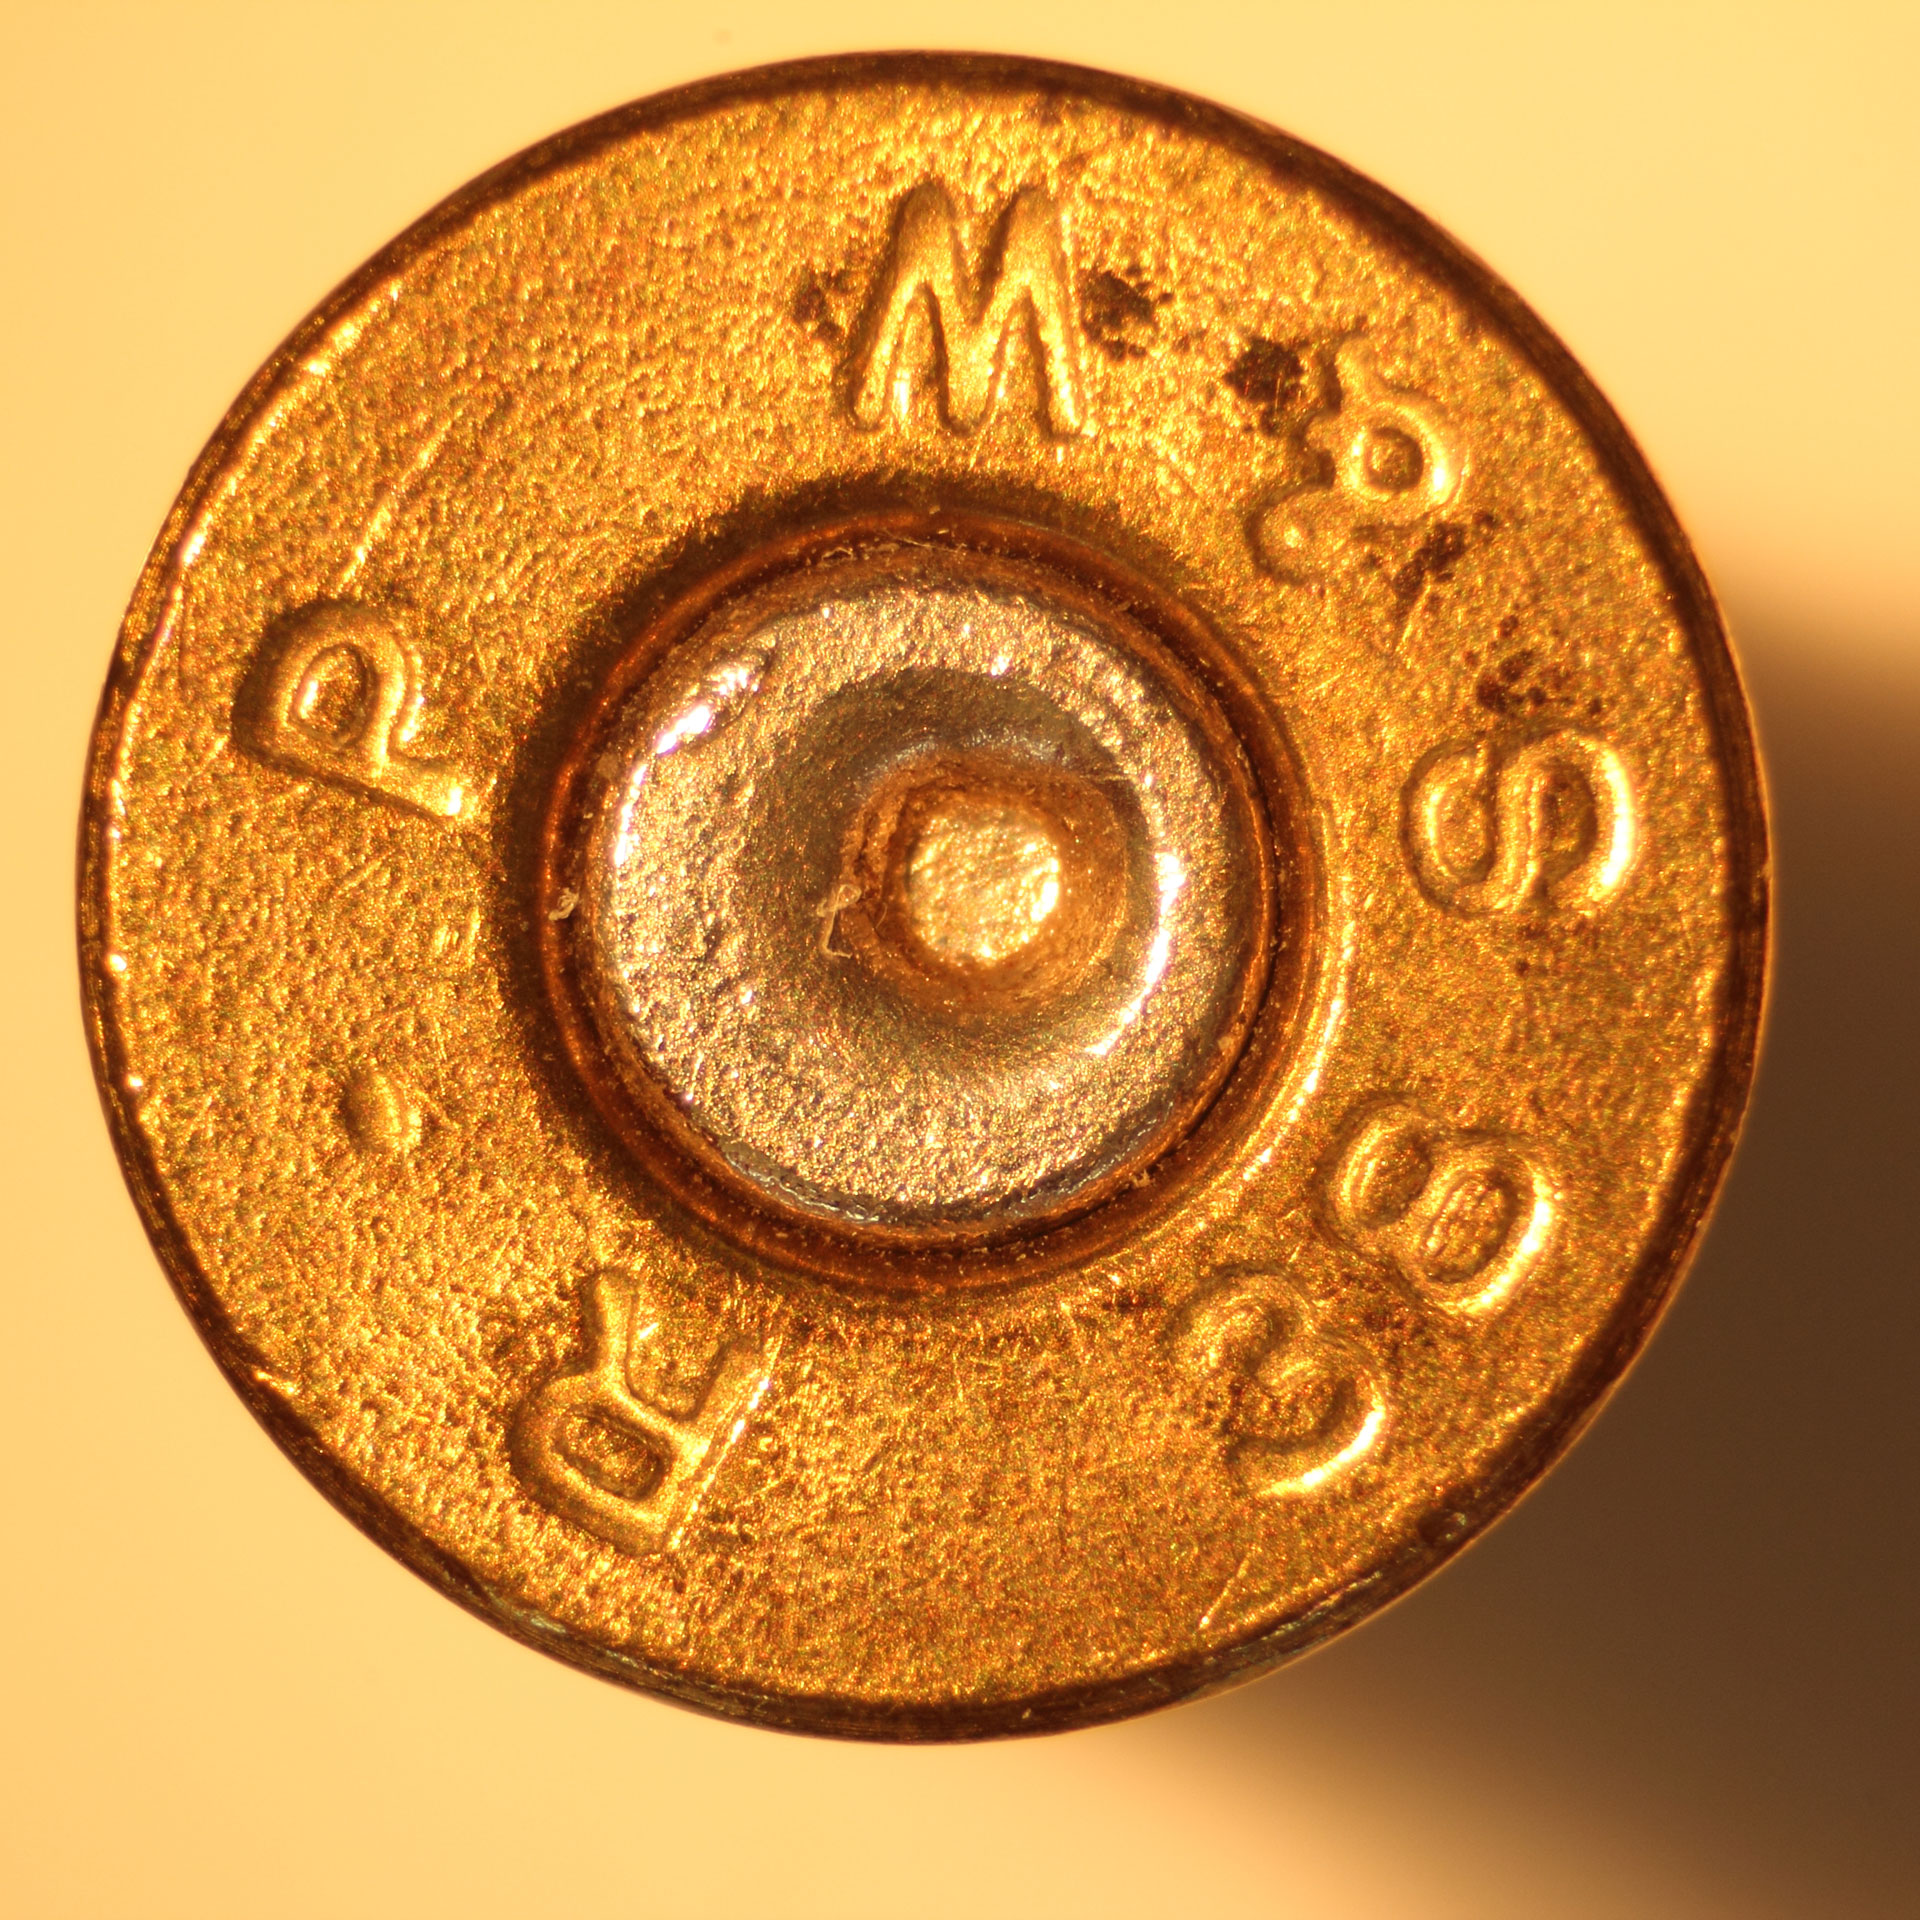 Shell casing taken with original TS-160 prototype by H Jay Margolis